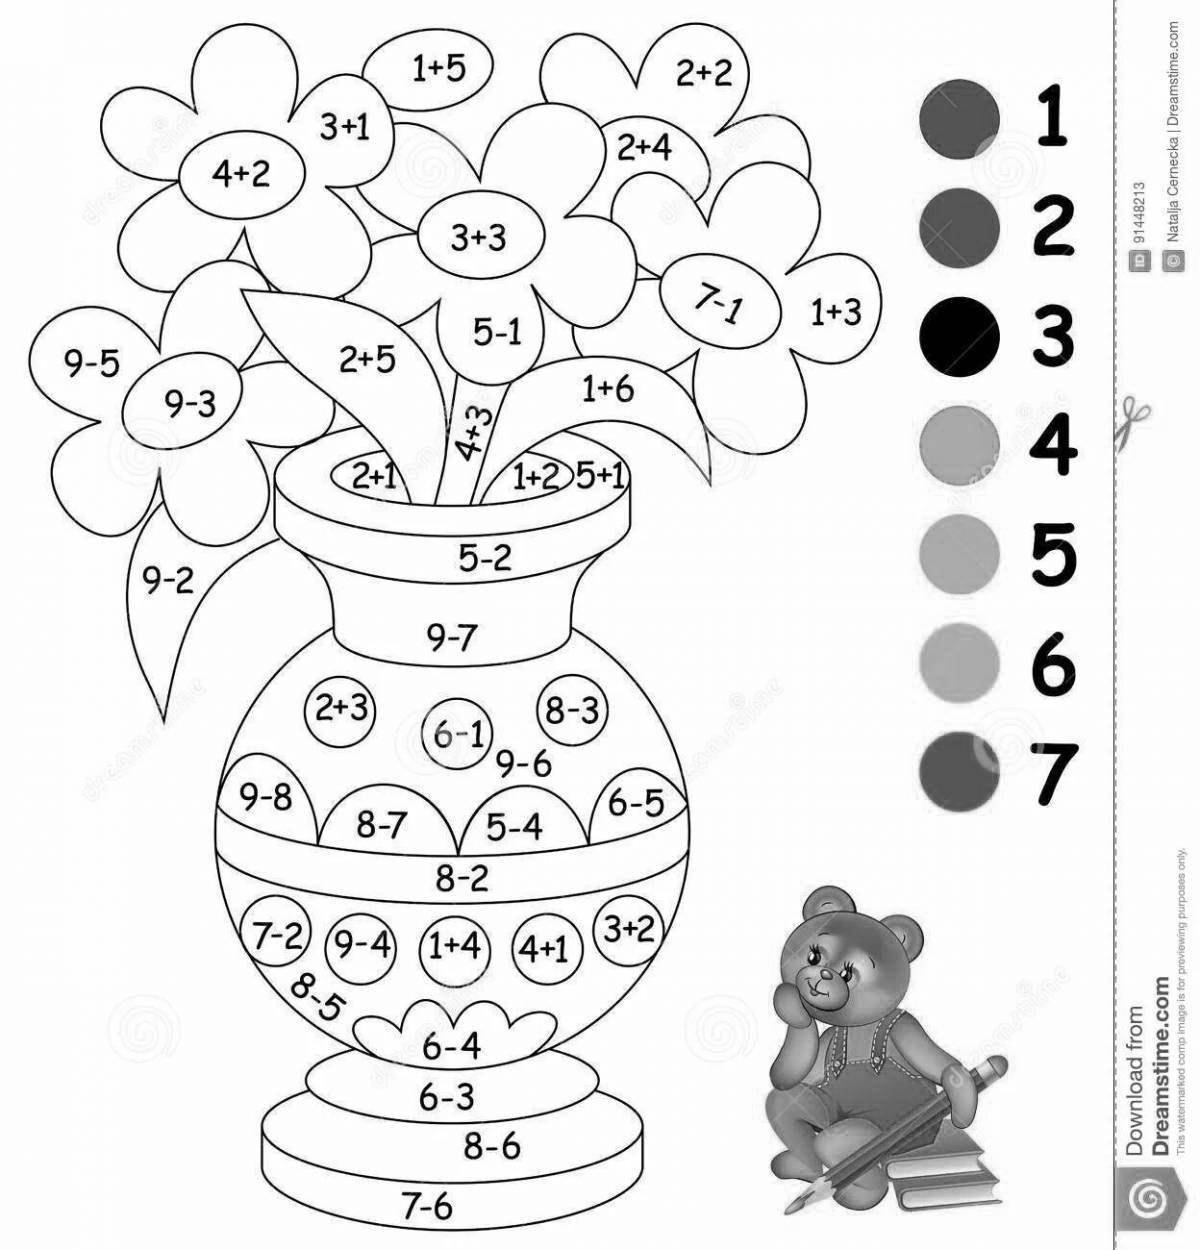 Fun math coloring book for 5-6 year olds